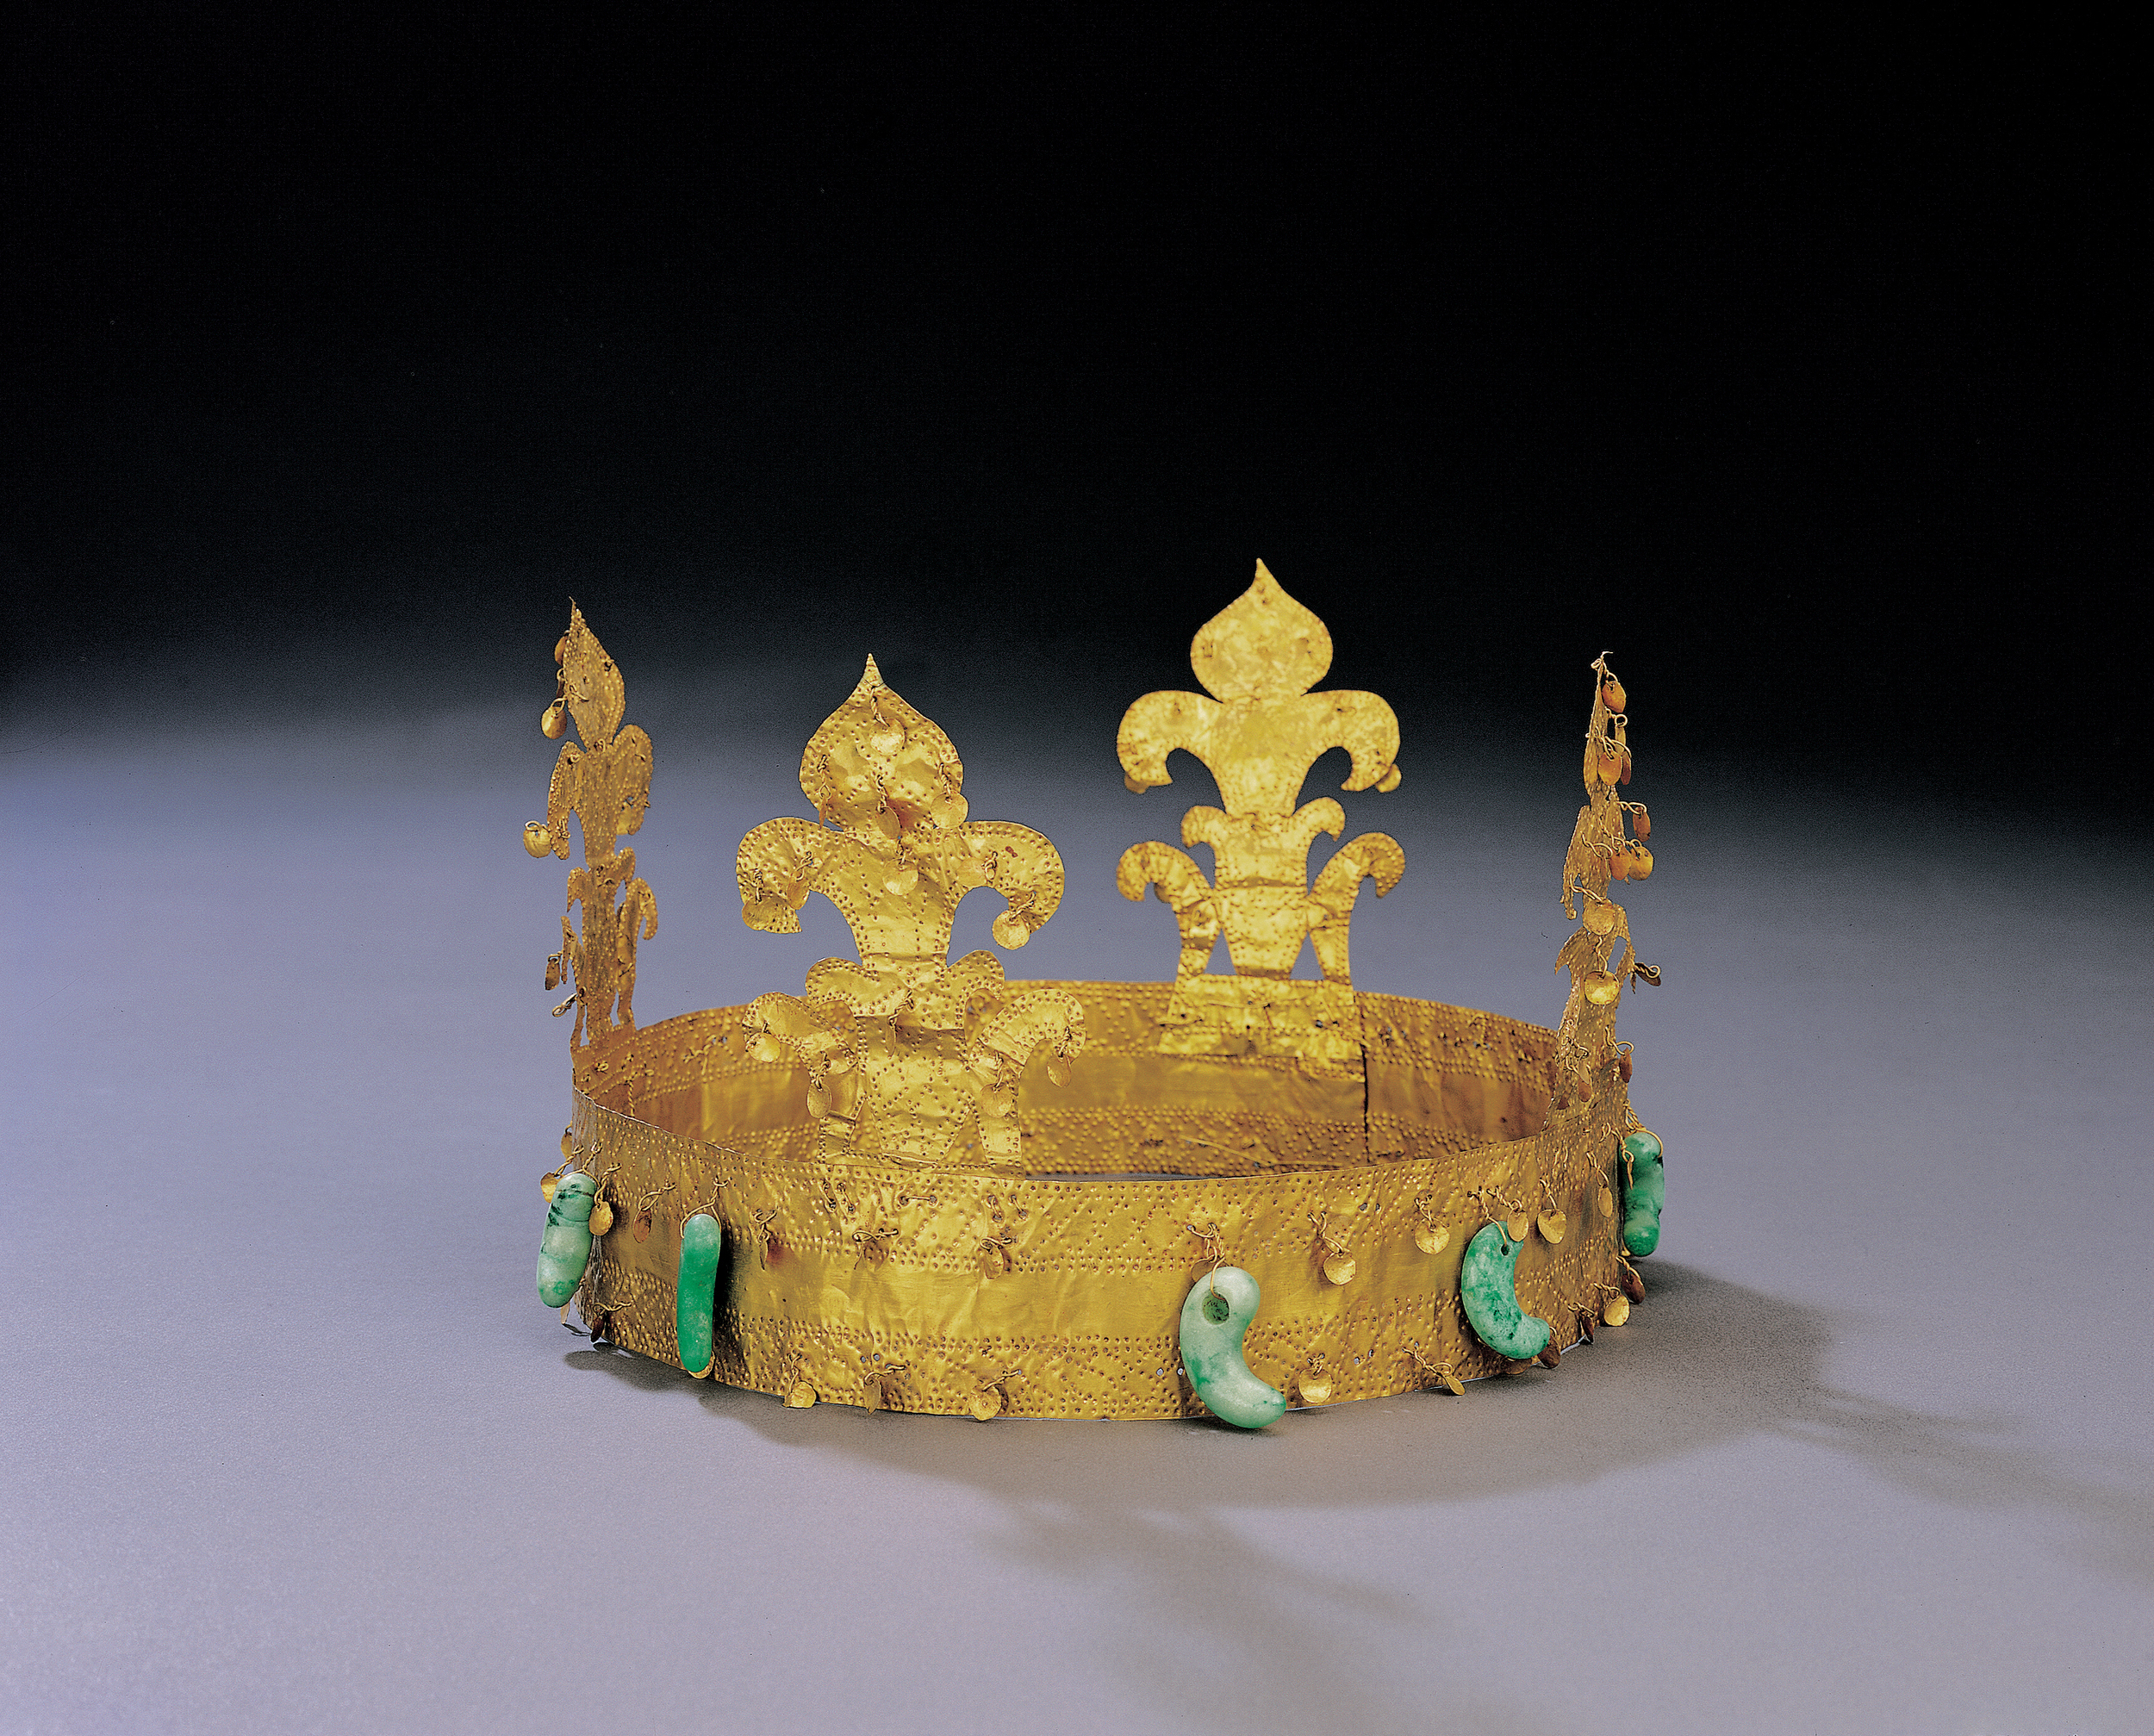 Gold Crown and Ornaments from Goryeong